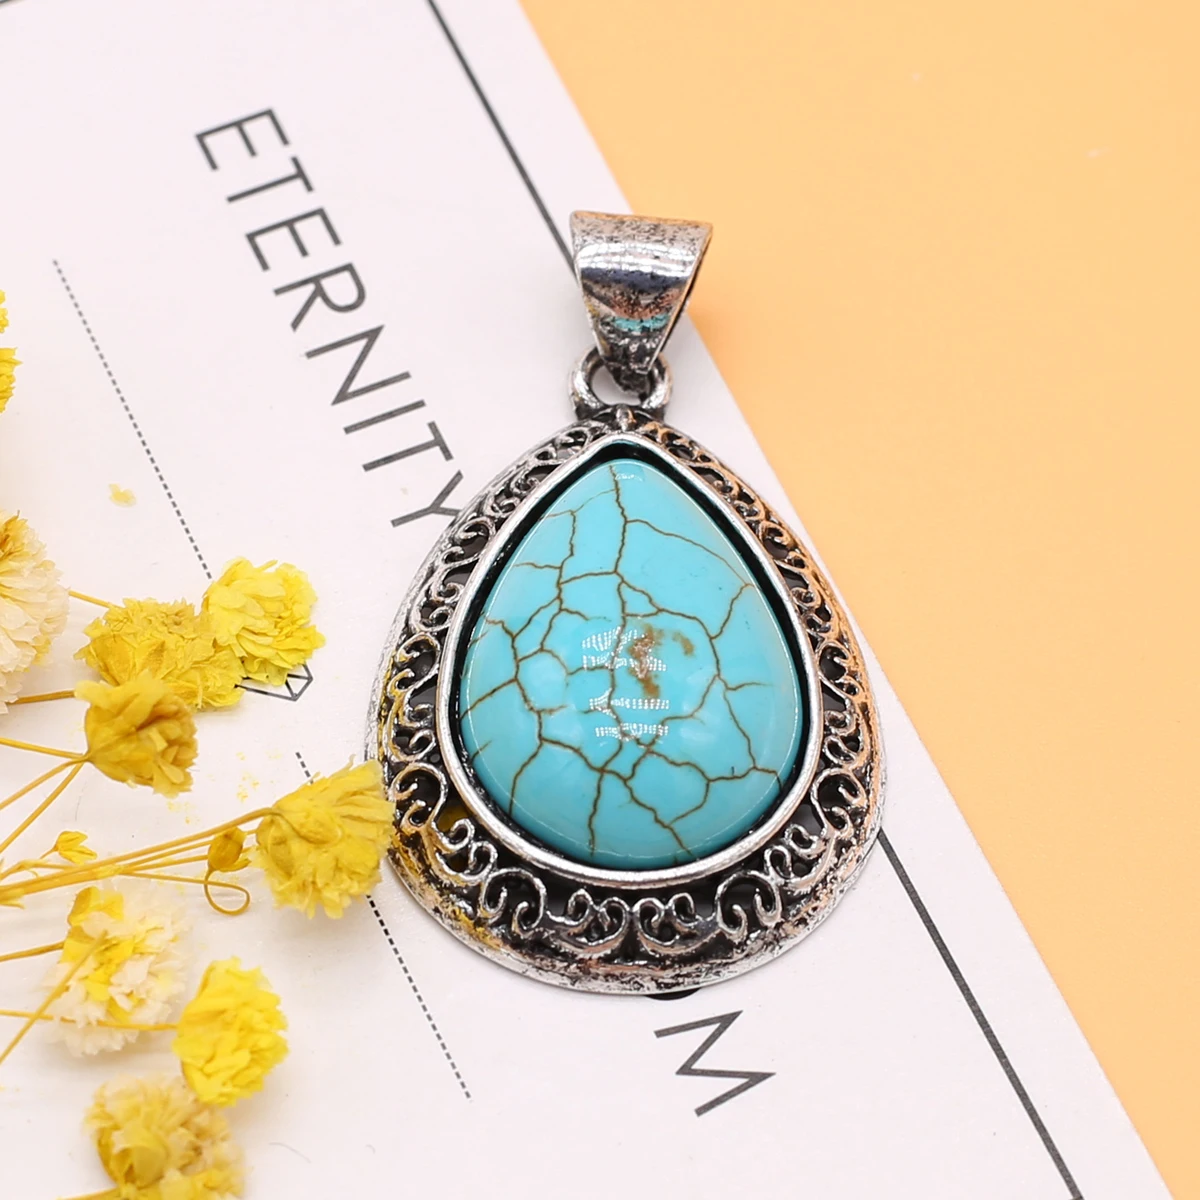 

New Natural Stone Necklace Oval Shape Crystal Blue Turquoise Fashion Vintage Pendants Necklace for Women Reiki Healing Gift